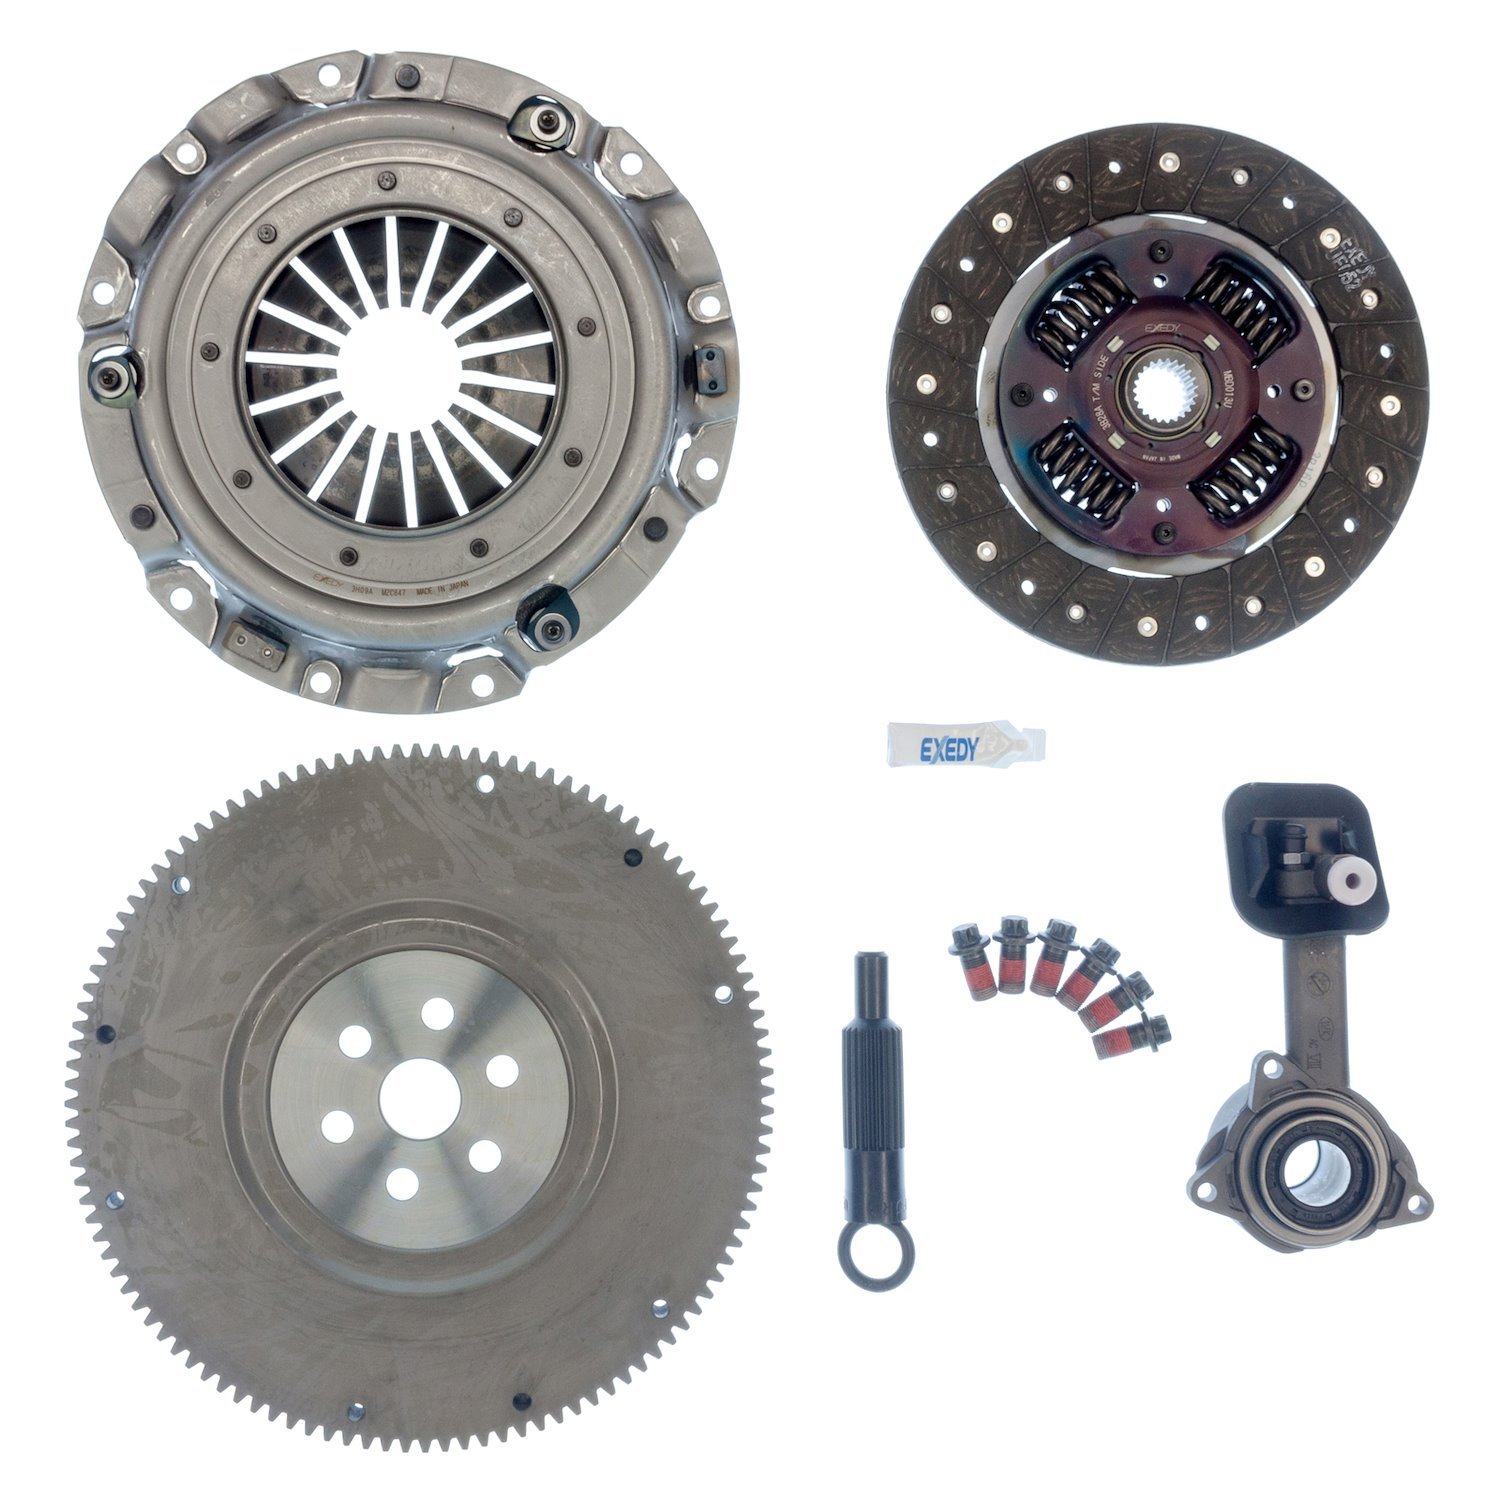 FMK1009FW OEM Replacement Transmission Clutch and Flywheel Kit, 2003-2007 Ford Focus L4